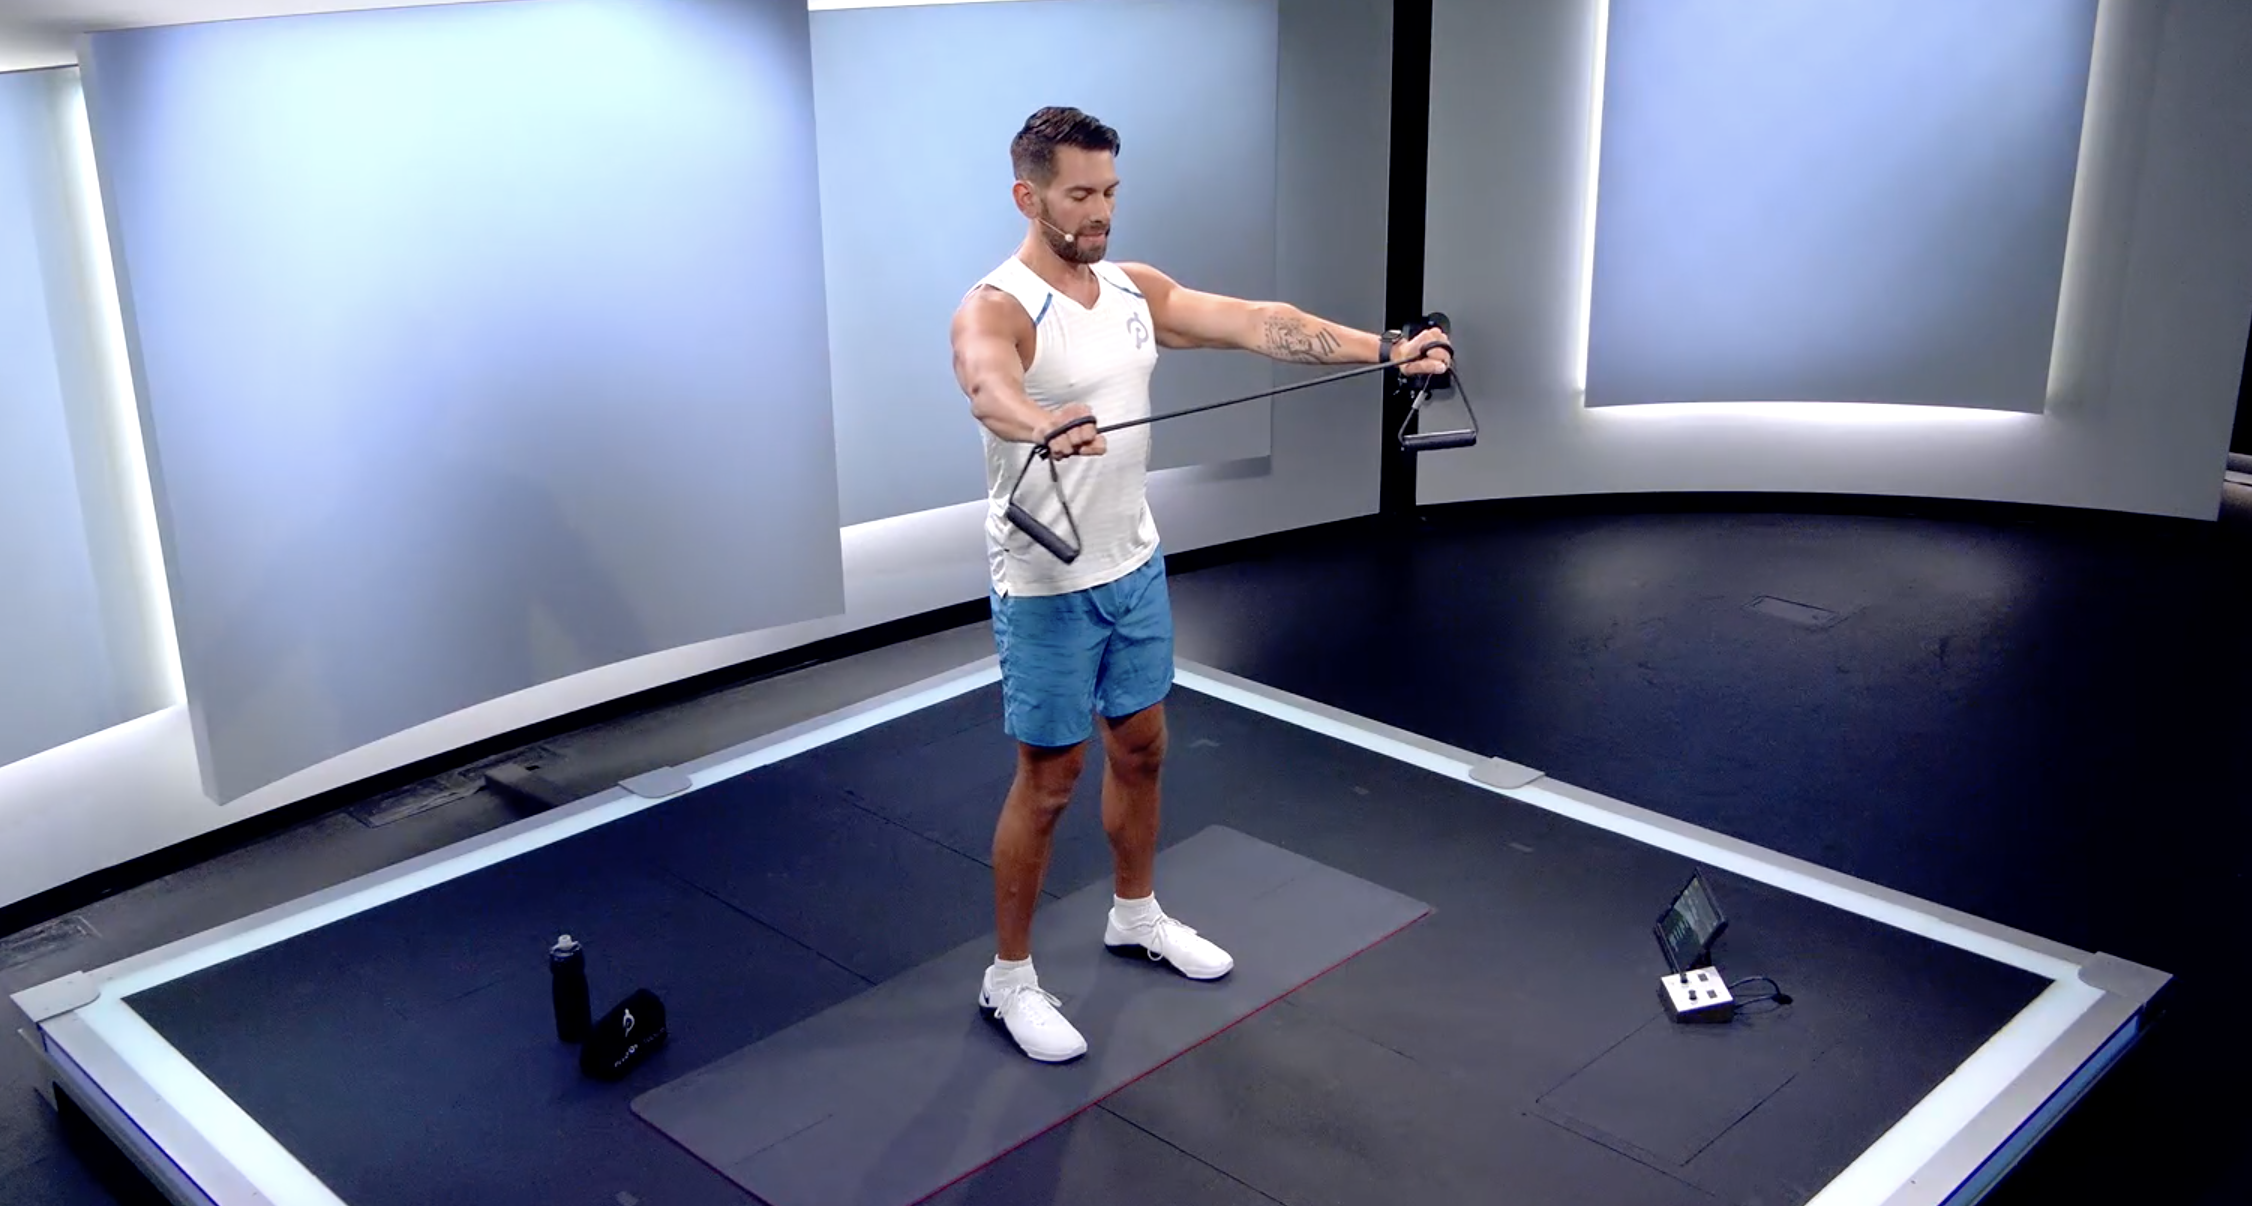 Peloton Instructor Matty Maggiacomo demonstrates upper body resistance band workout move